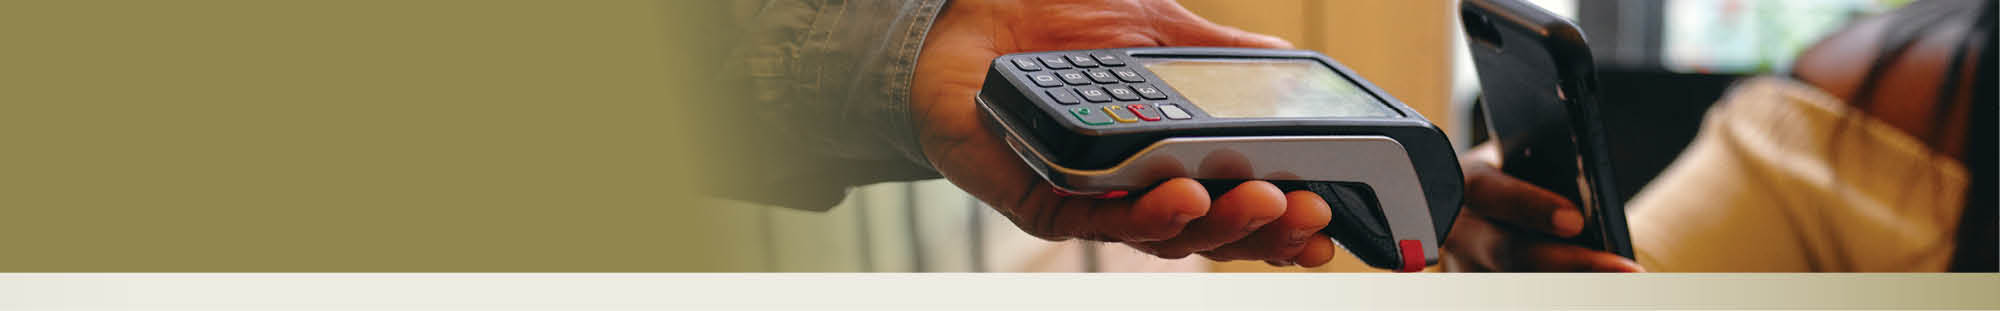 Card Payment Image